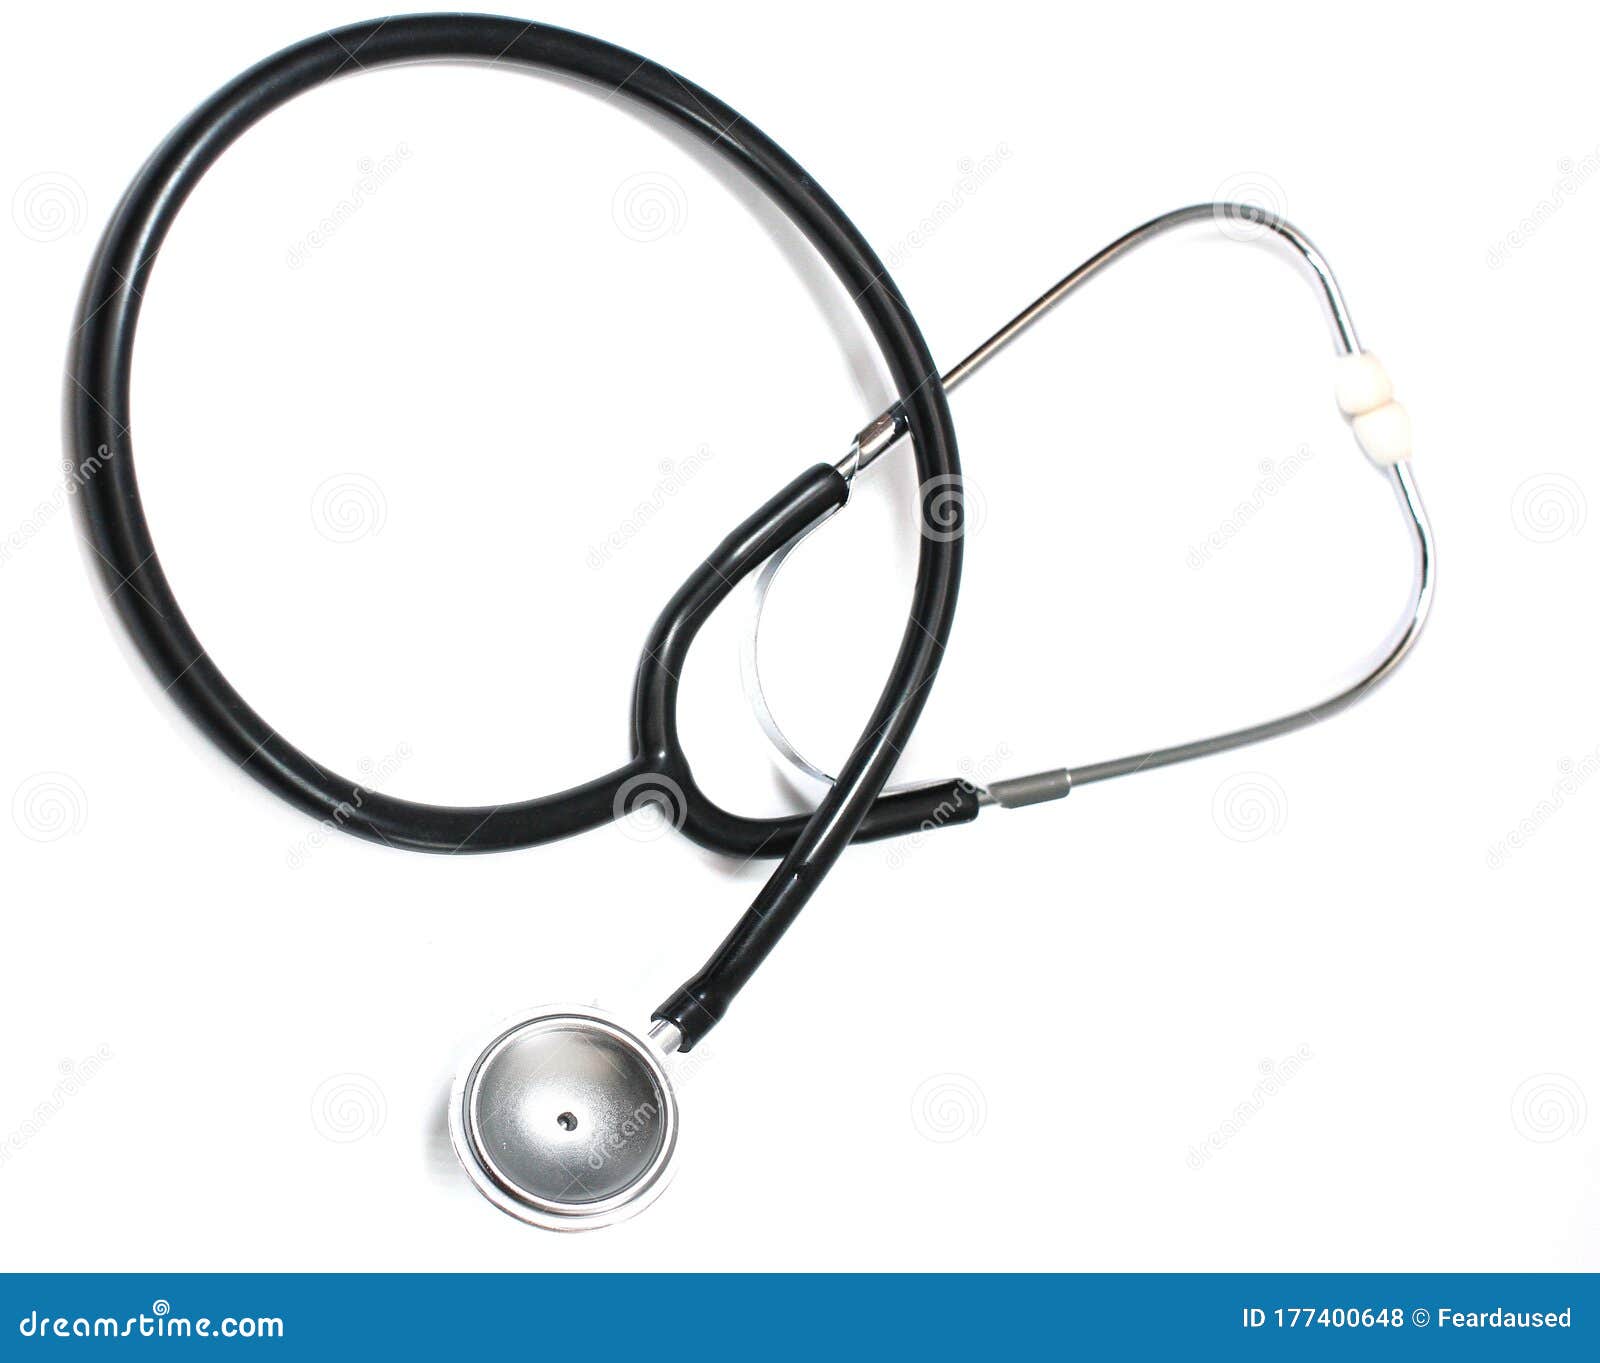 A Stethoscope Isolated with White Background. Stock Photo - Image of ...